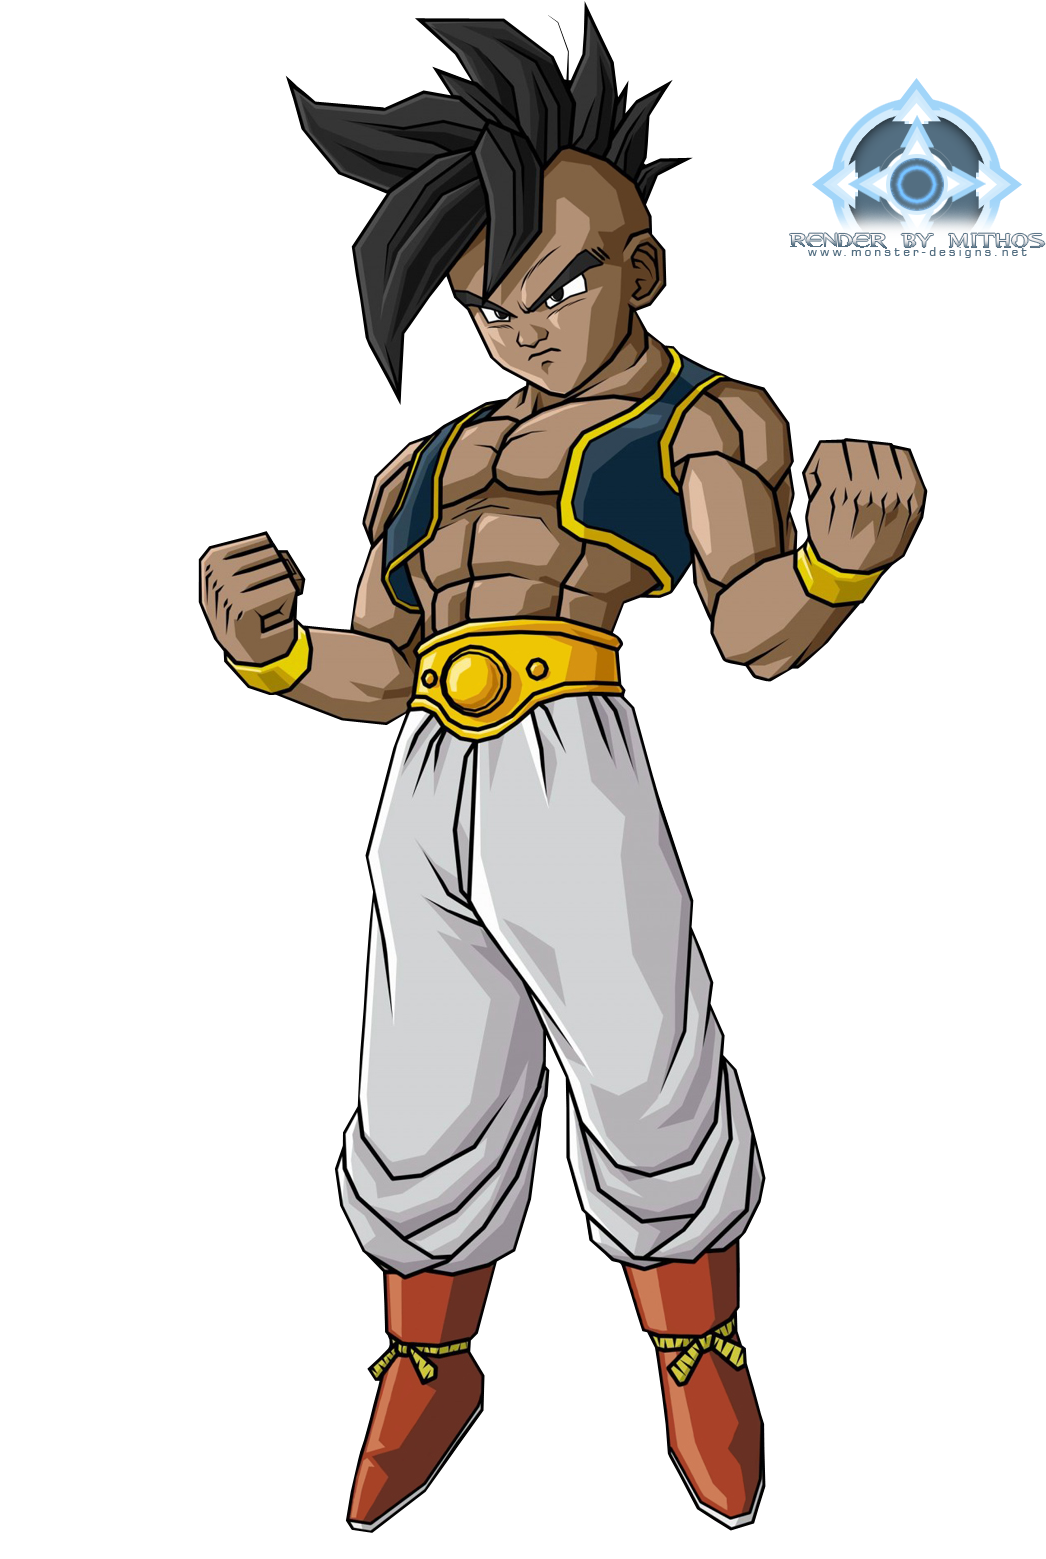 Your Favorite Rappers As Dragon Ball Z Characters - Oob Dragon Ball Z (1200x1600)